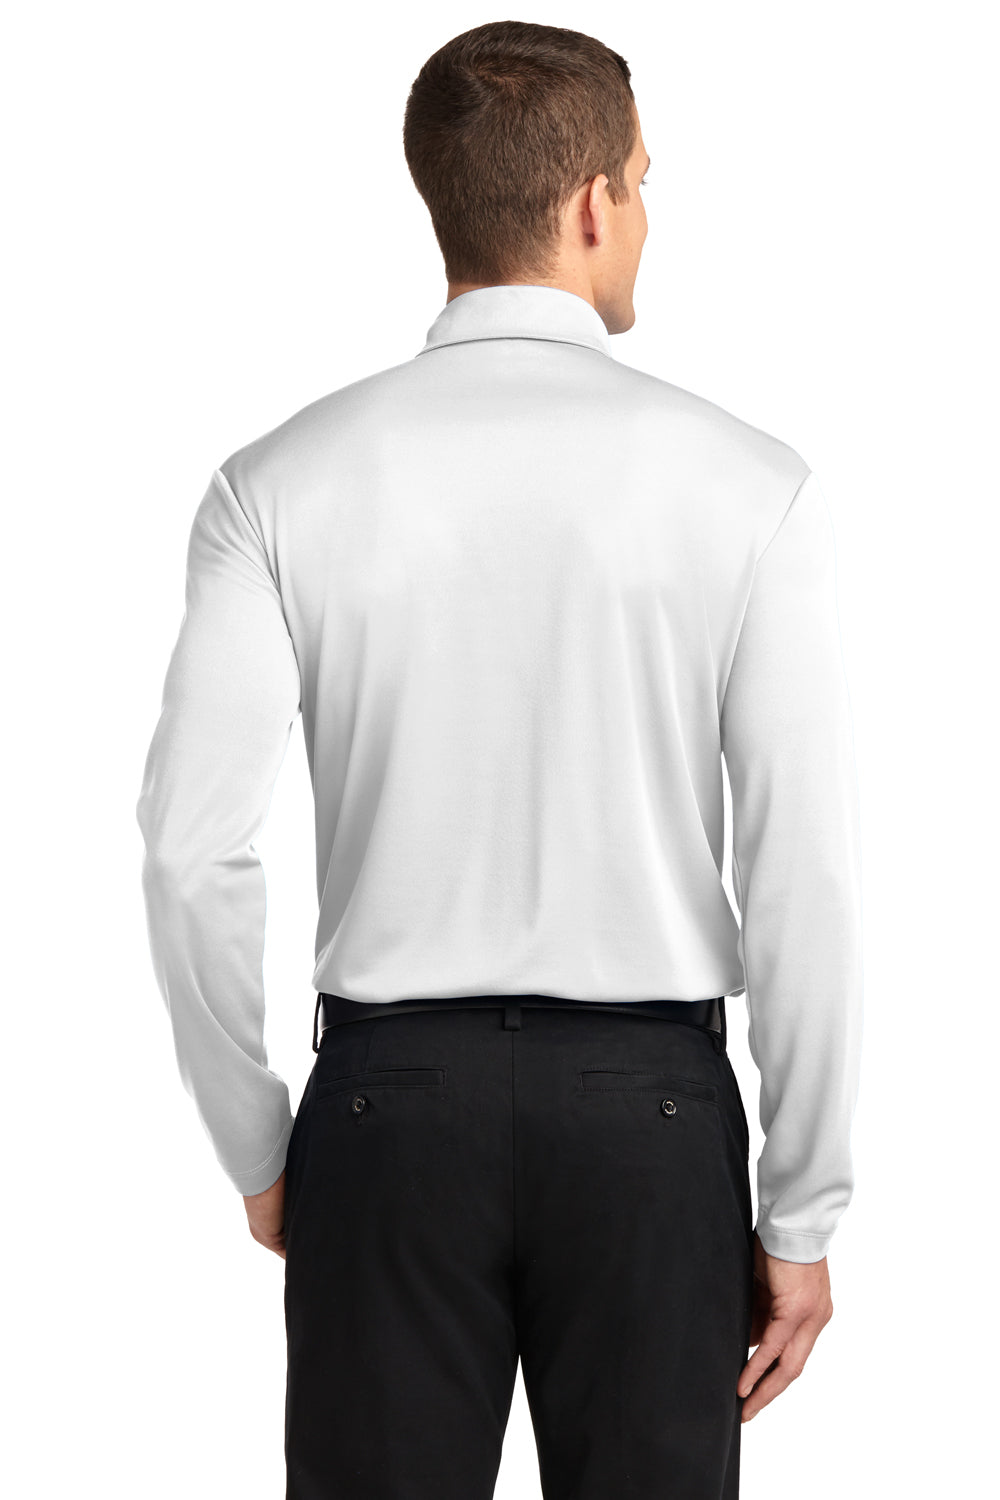 Port Authority K540LS Mens Silk Touch Performance Moisture Wicking Long Sleeve Polo Shirt White Back